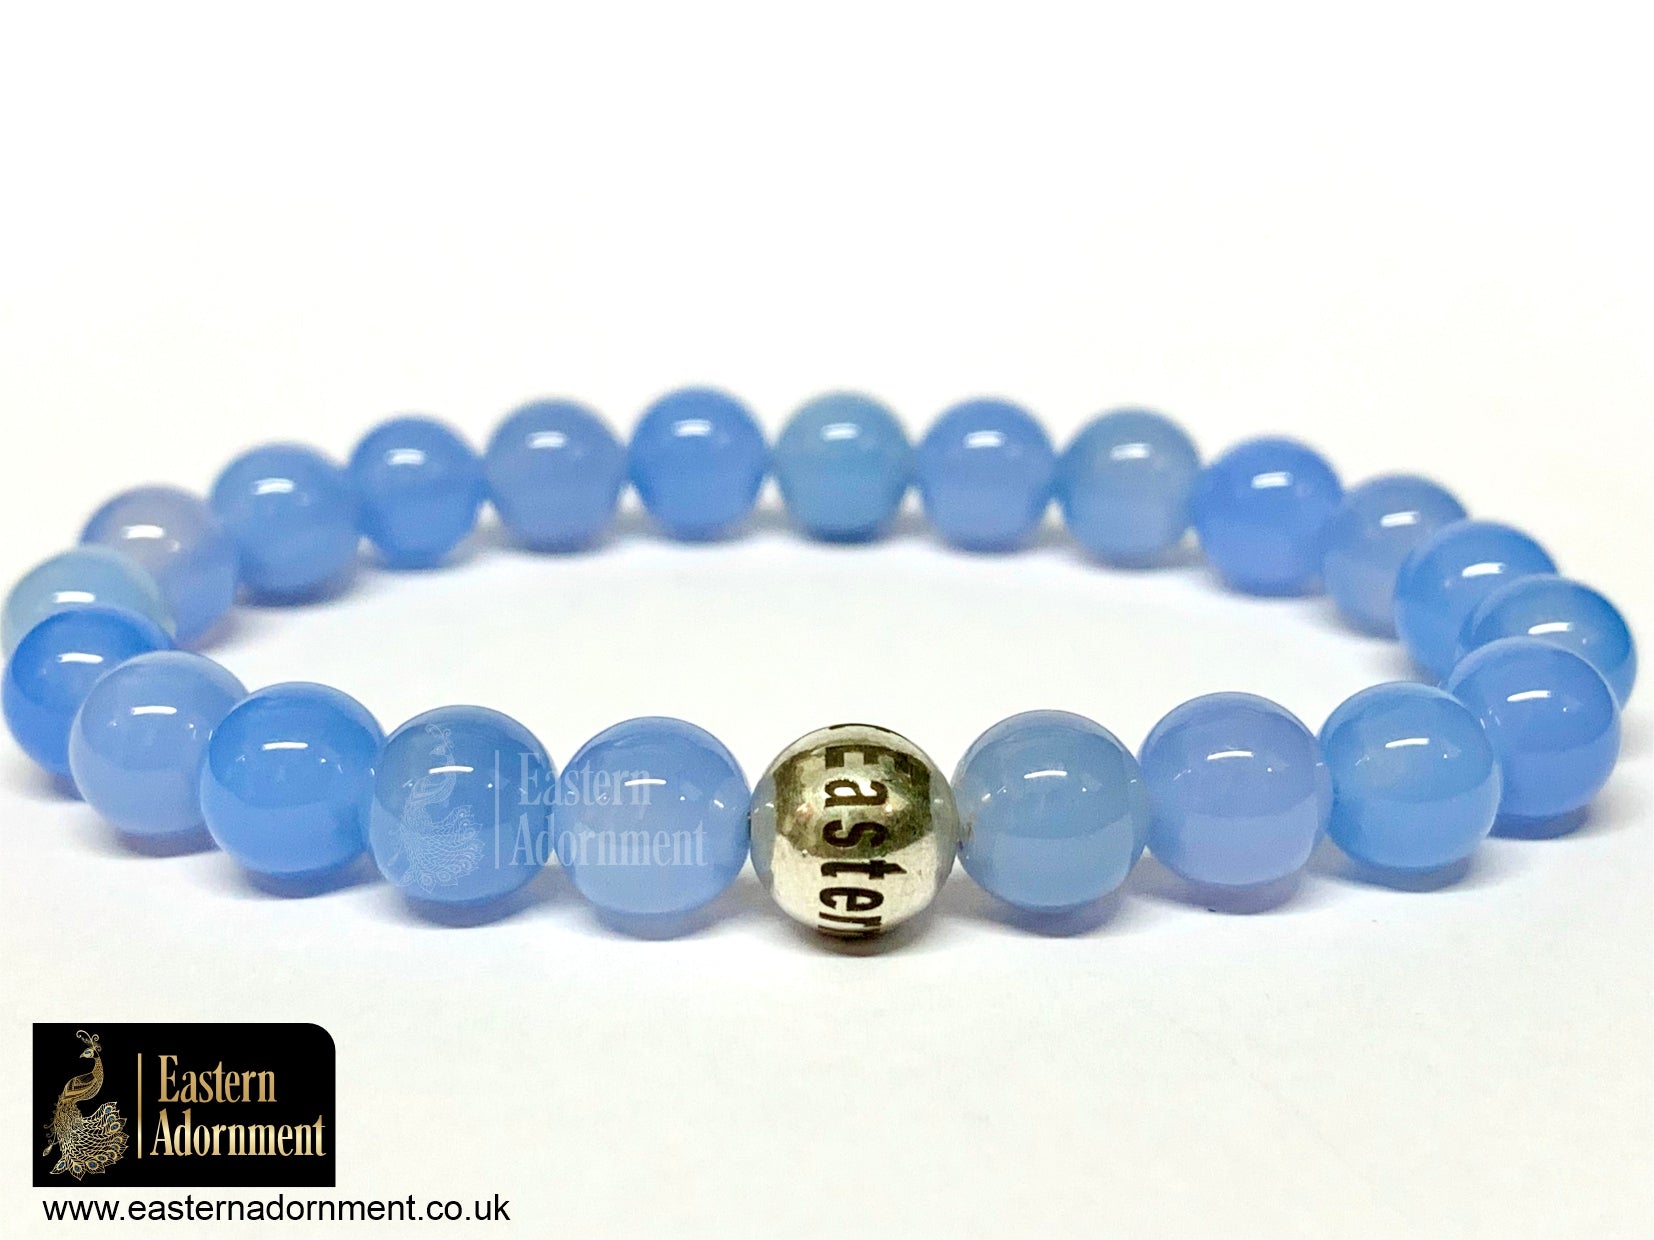 Blue Chalcedony bead bracelet, with Eastern Adornment branded silver bead.